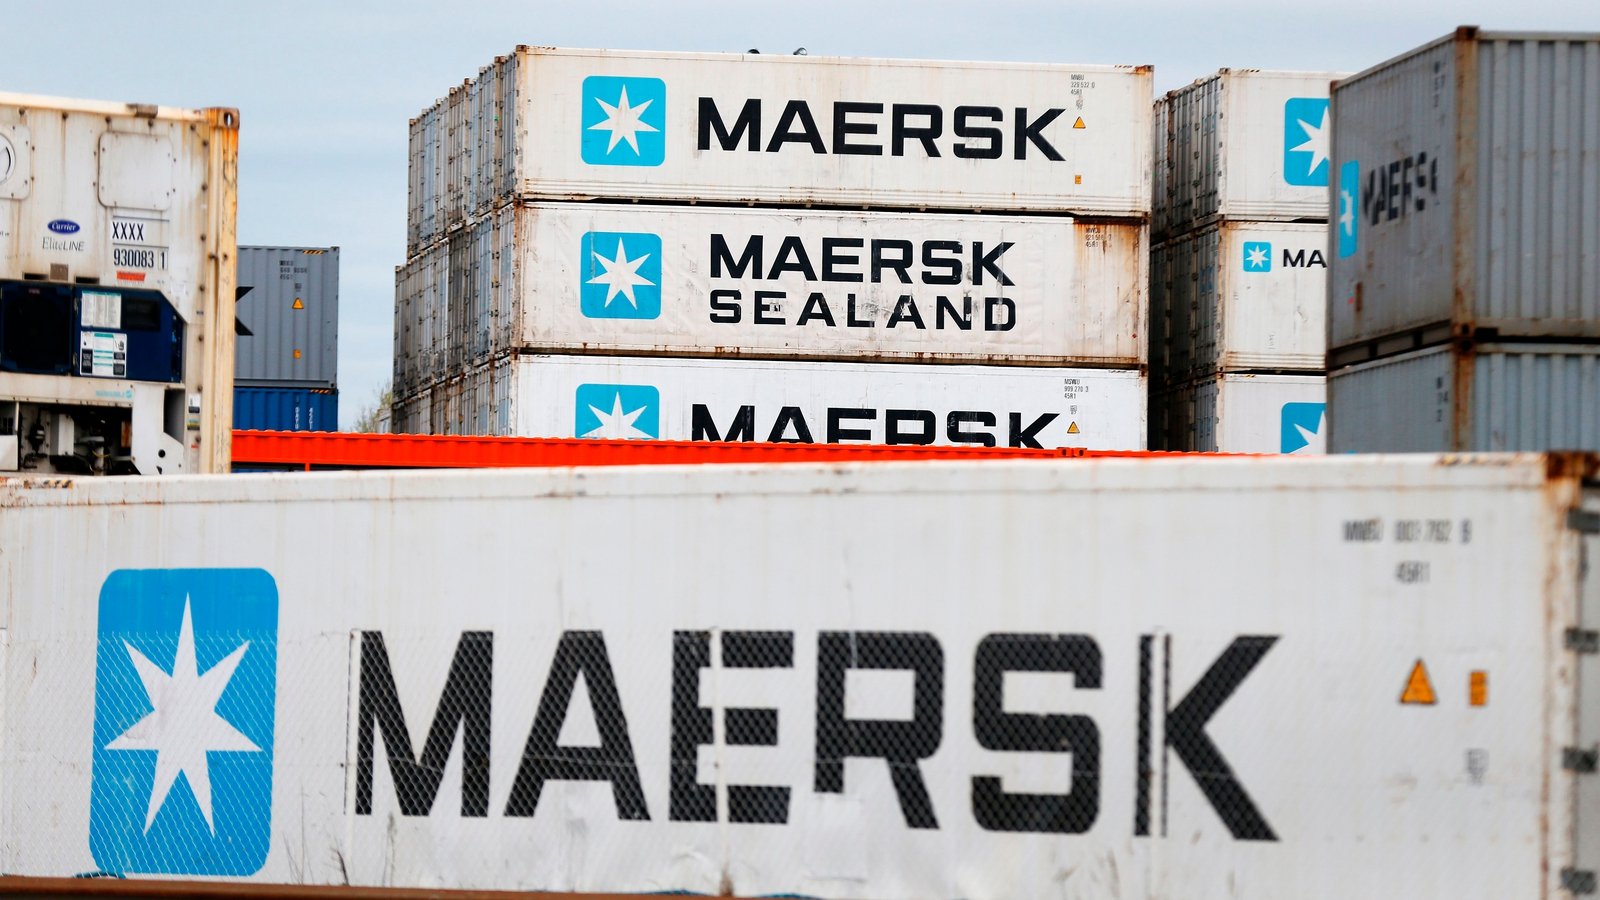 Maersk raises full-year profit guidance after strong Q1